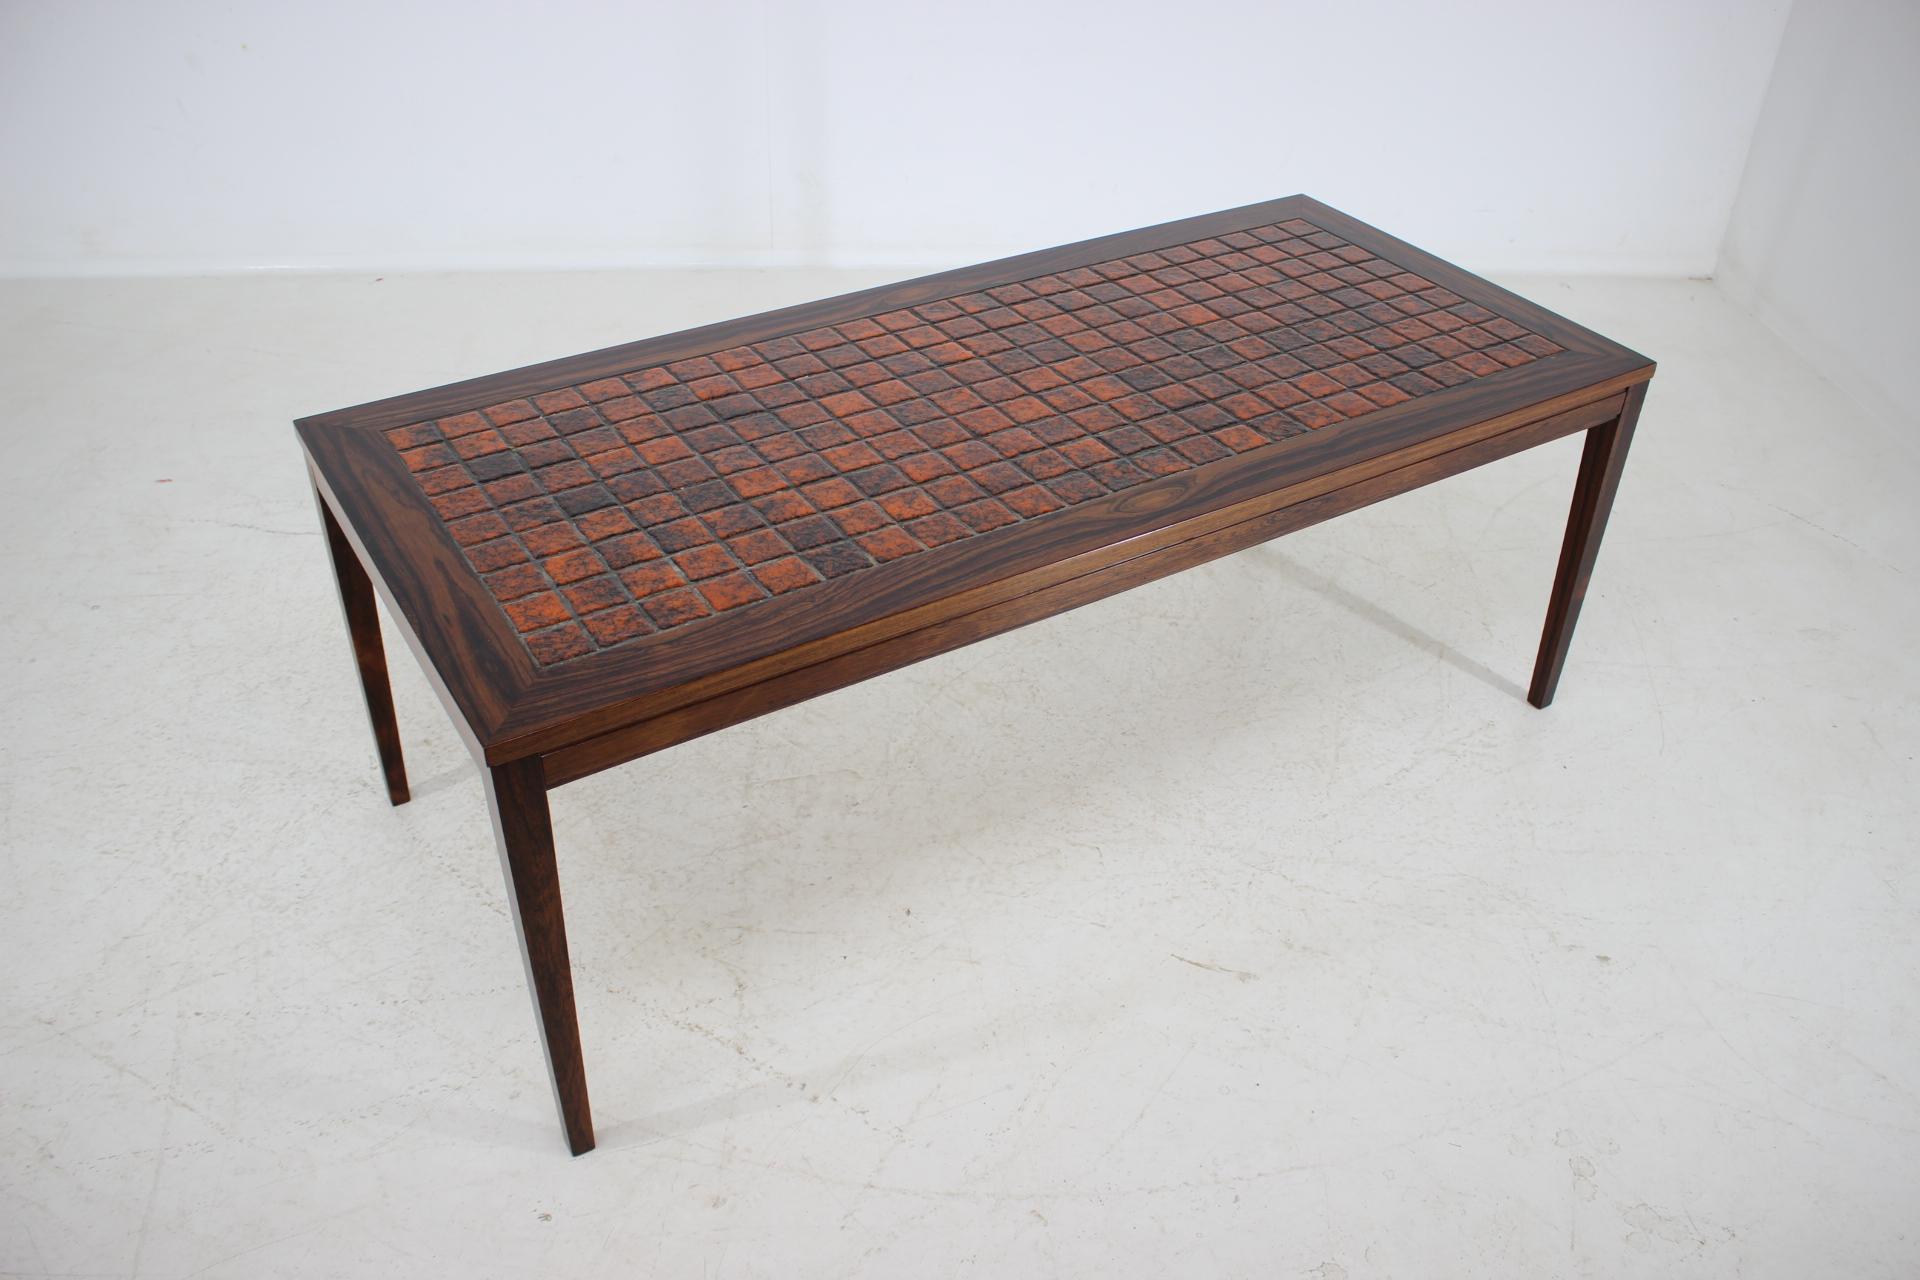 Ceramic 1960s Palisander and Tile Coffee Table, Denmark